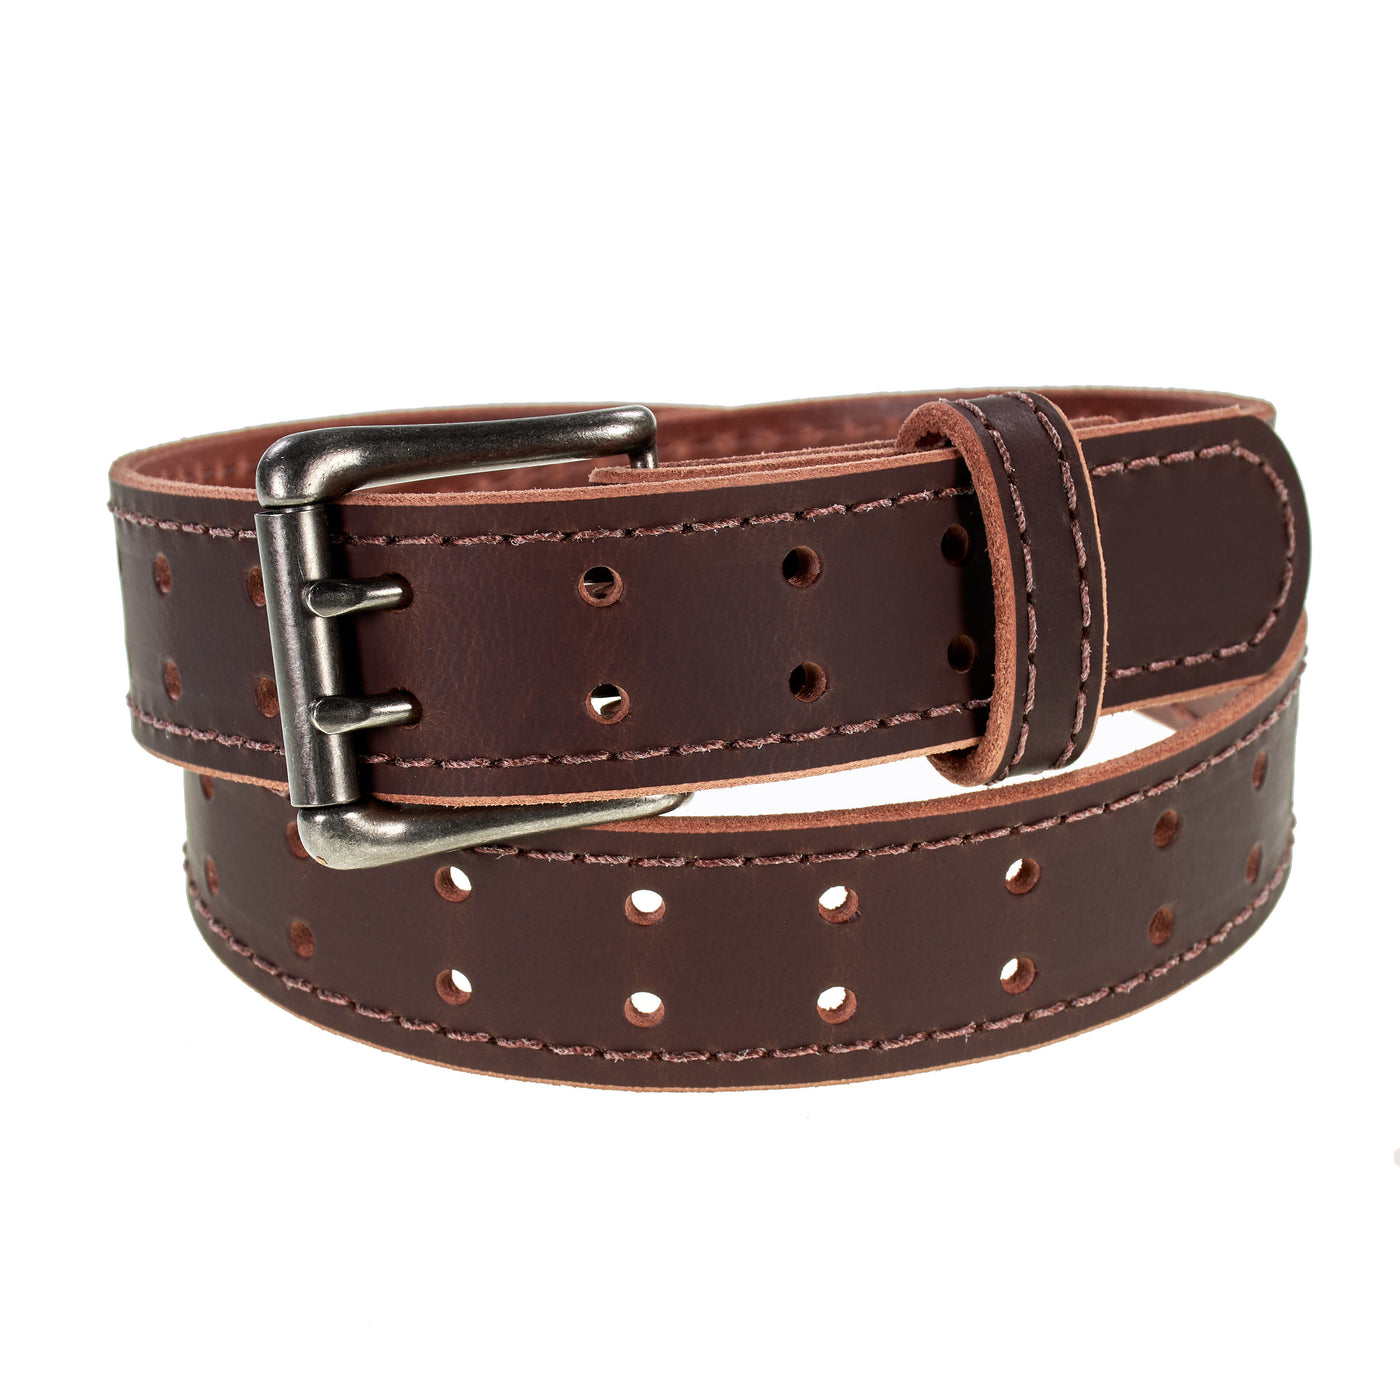 Double Prong Retro Style Leather Belt - 1.5" Matte Nickel Buckle